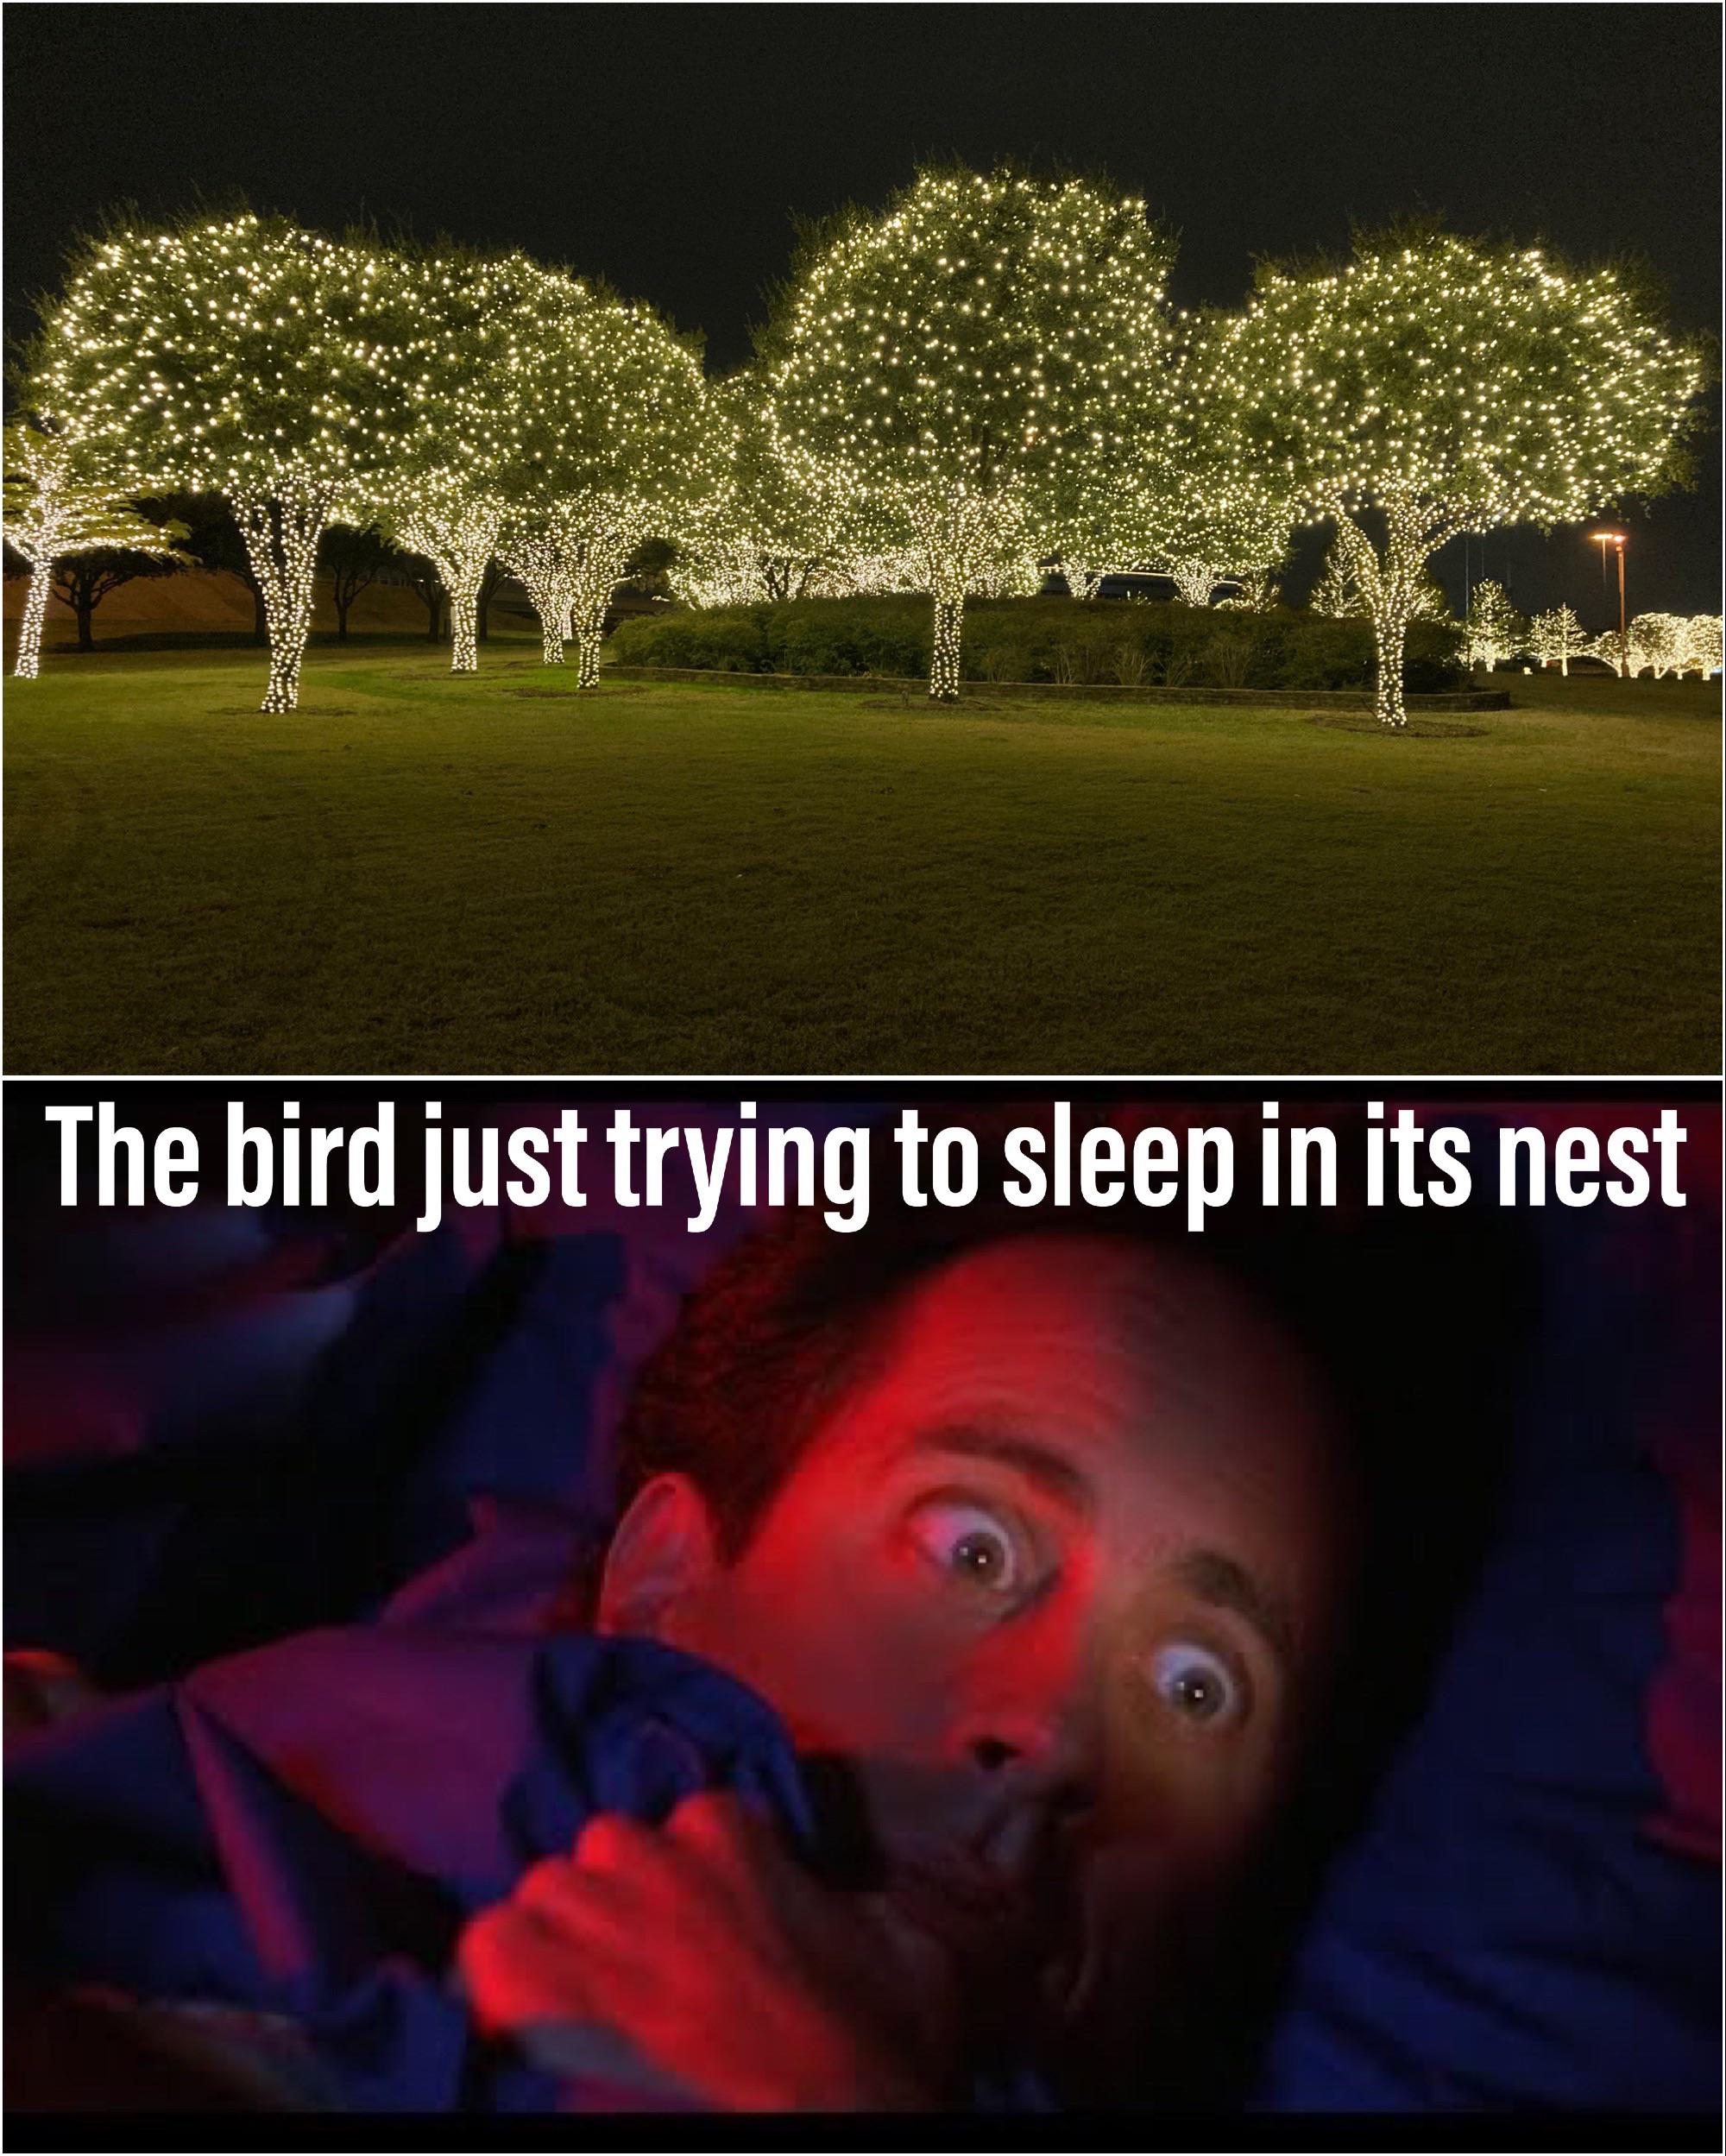 The bird just trying to sleep in its nest